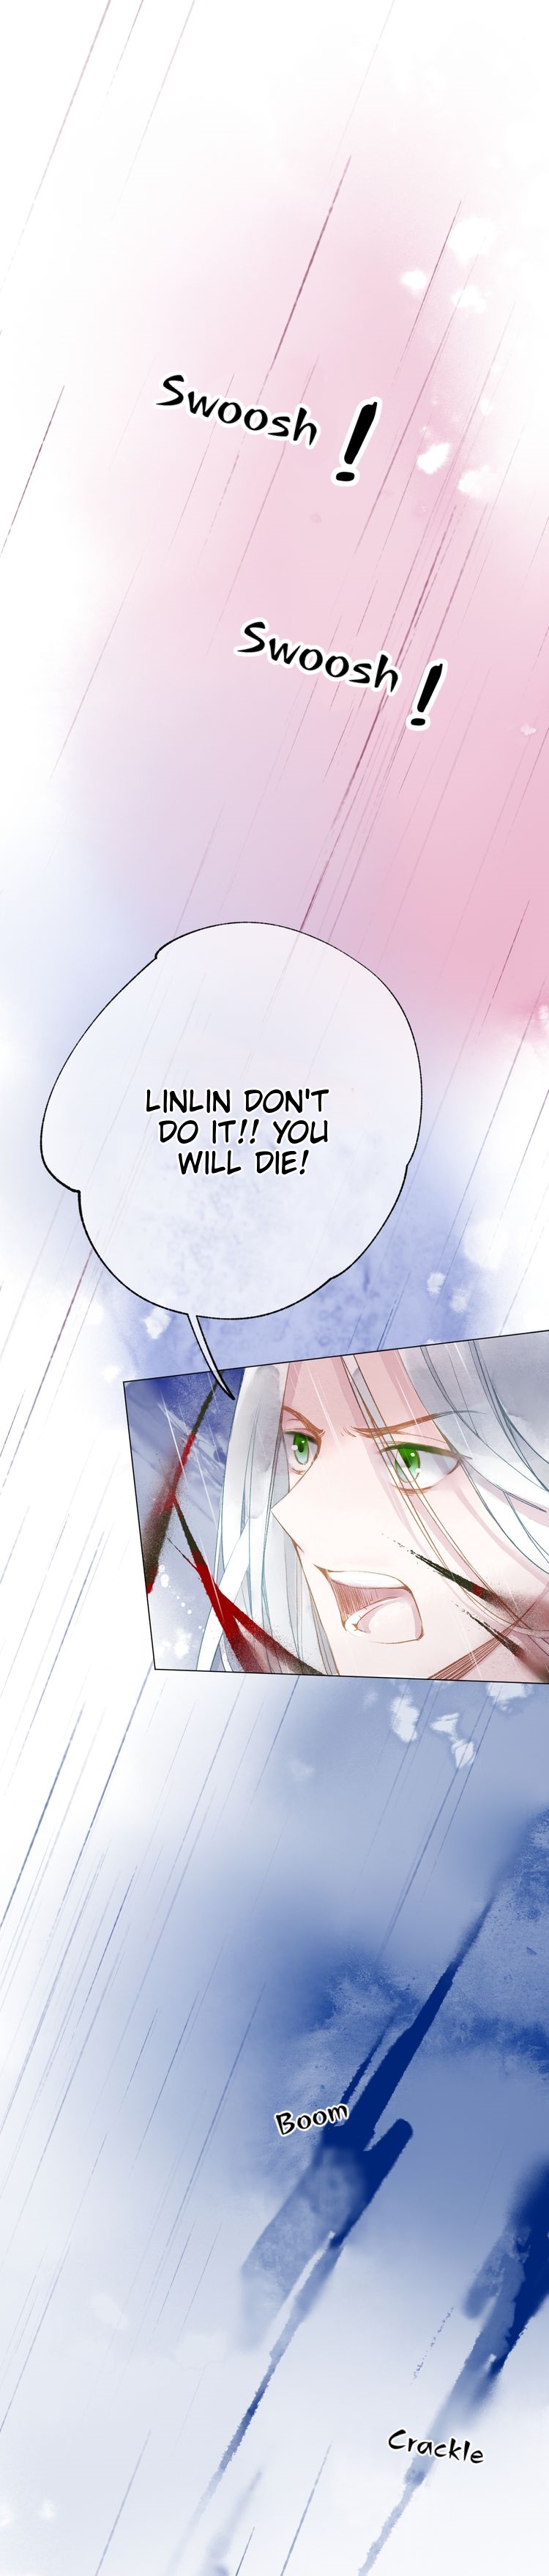 Leaf and Bell Ch. 21 Silly girl